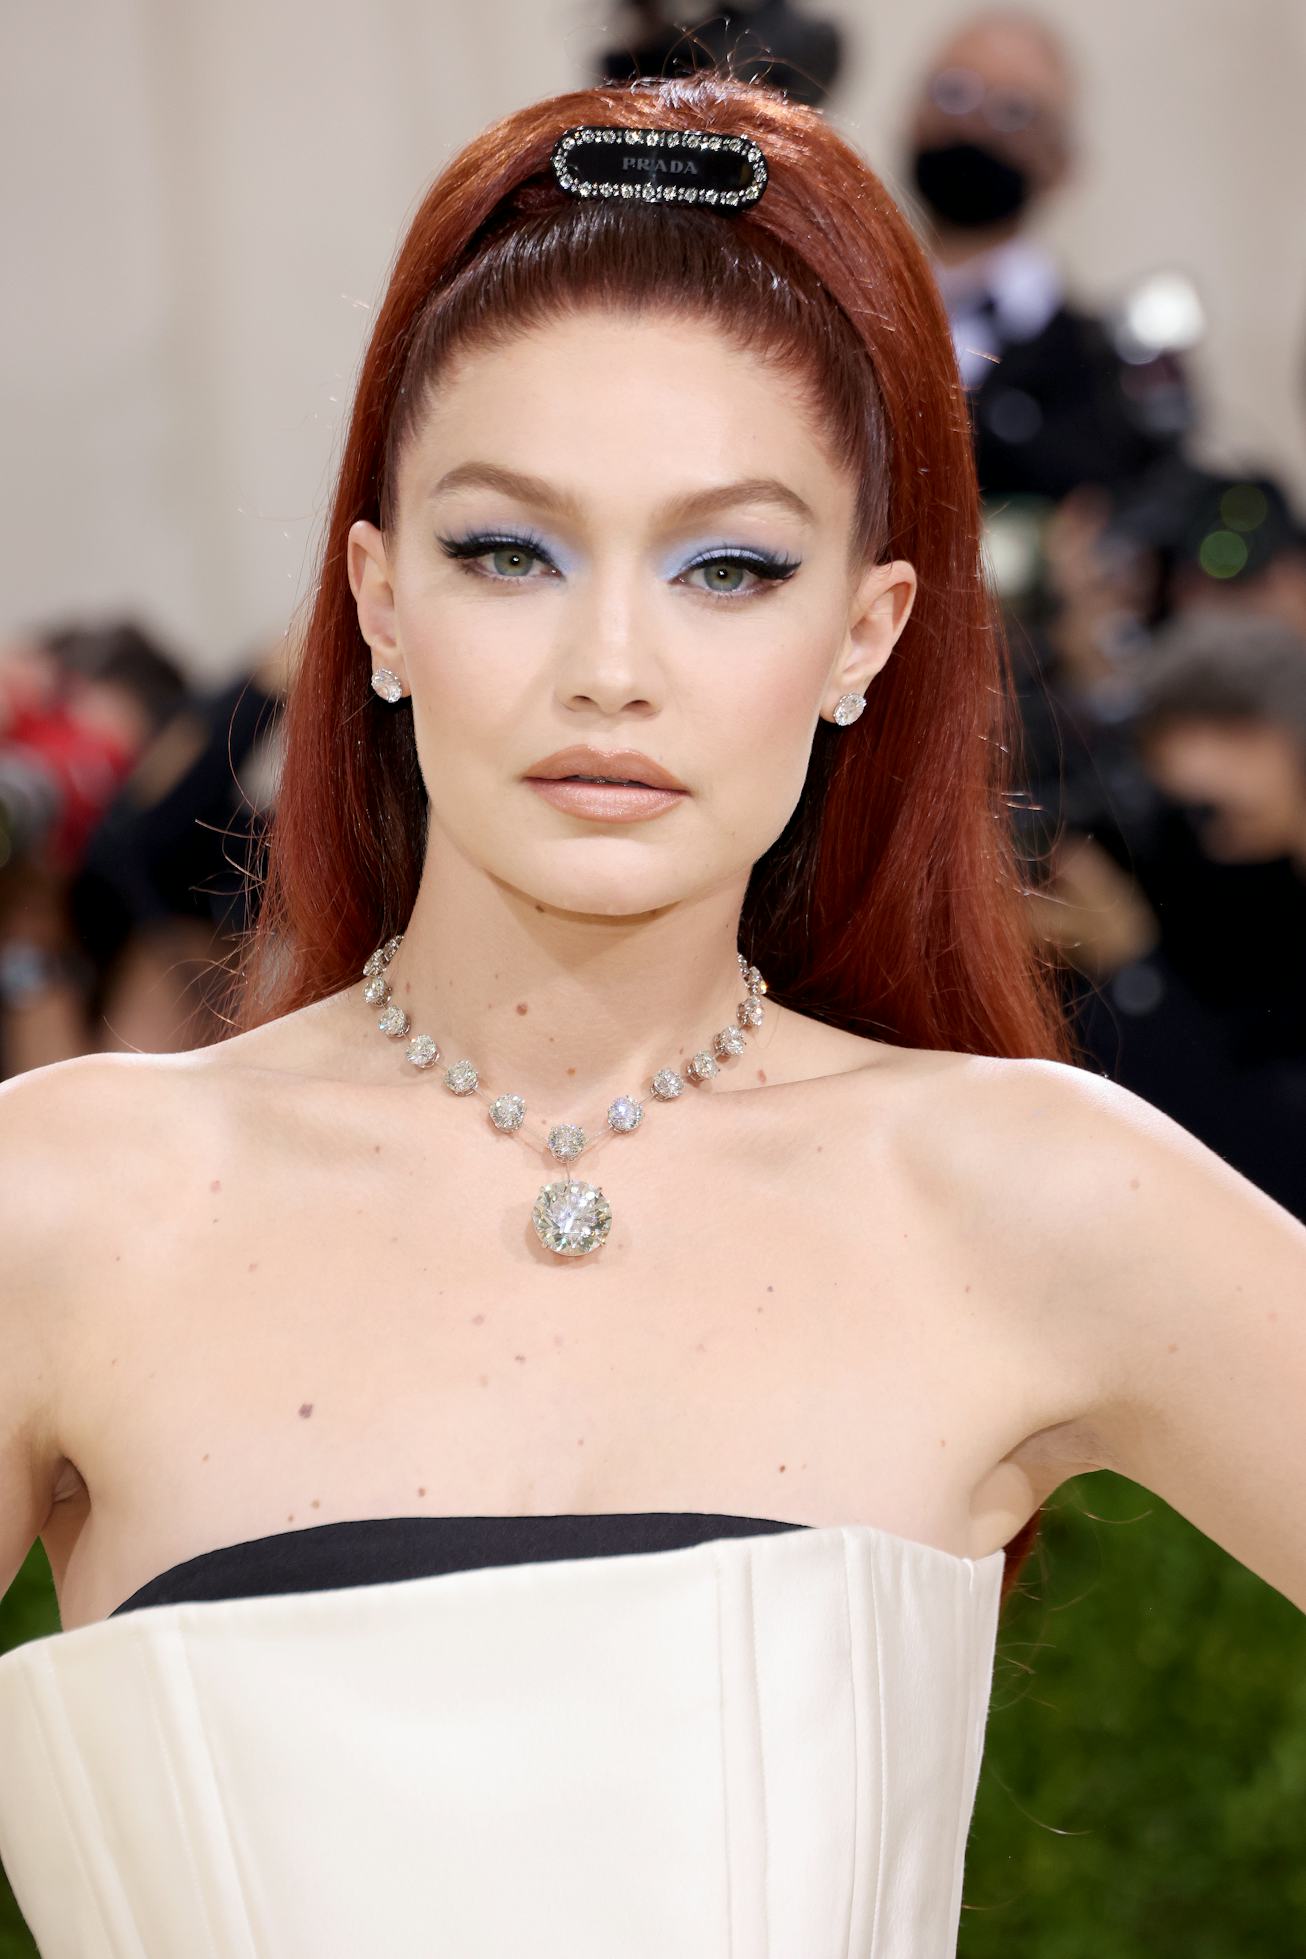 NEW YORK, NEW YORK - SEPTEMBER 13: Gigi Hadid attends The 2021 Met Gala Celebrating In America: A Le...